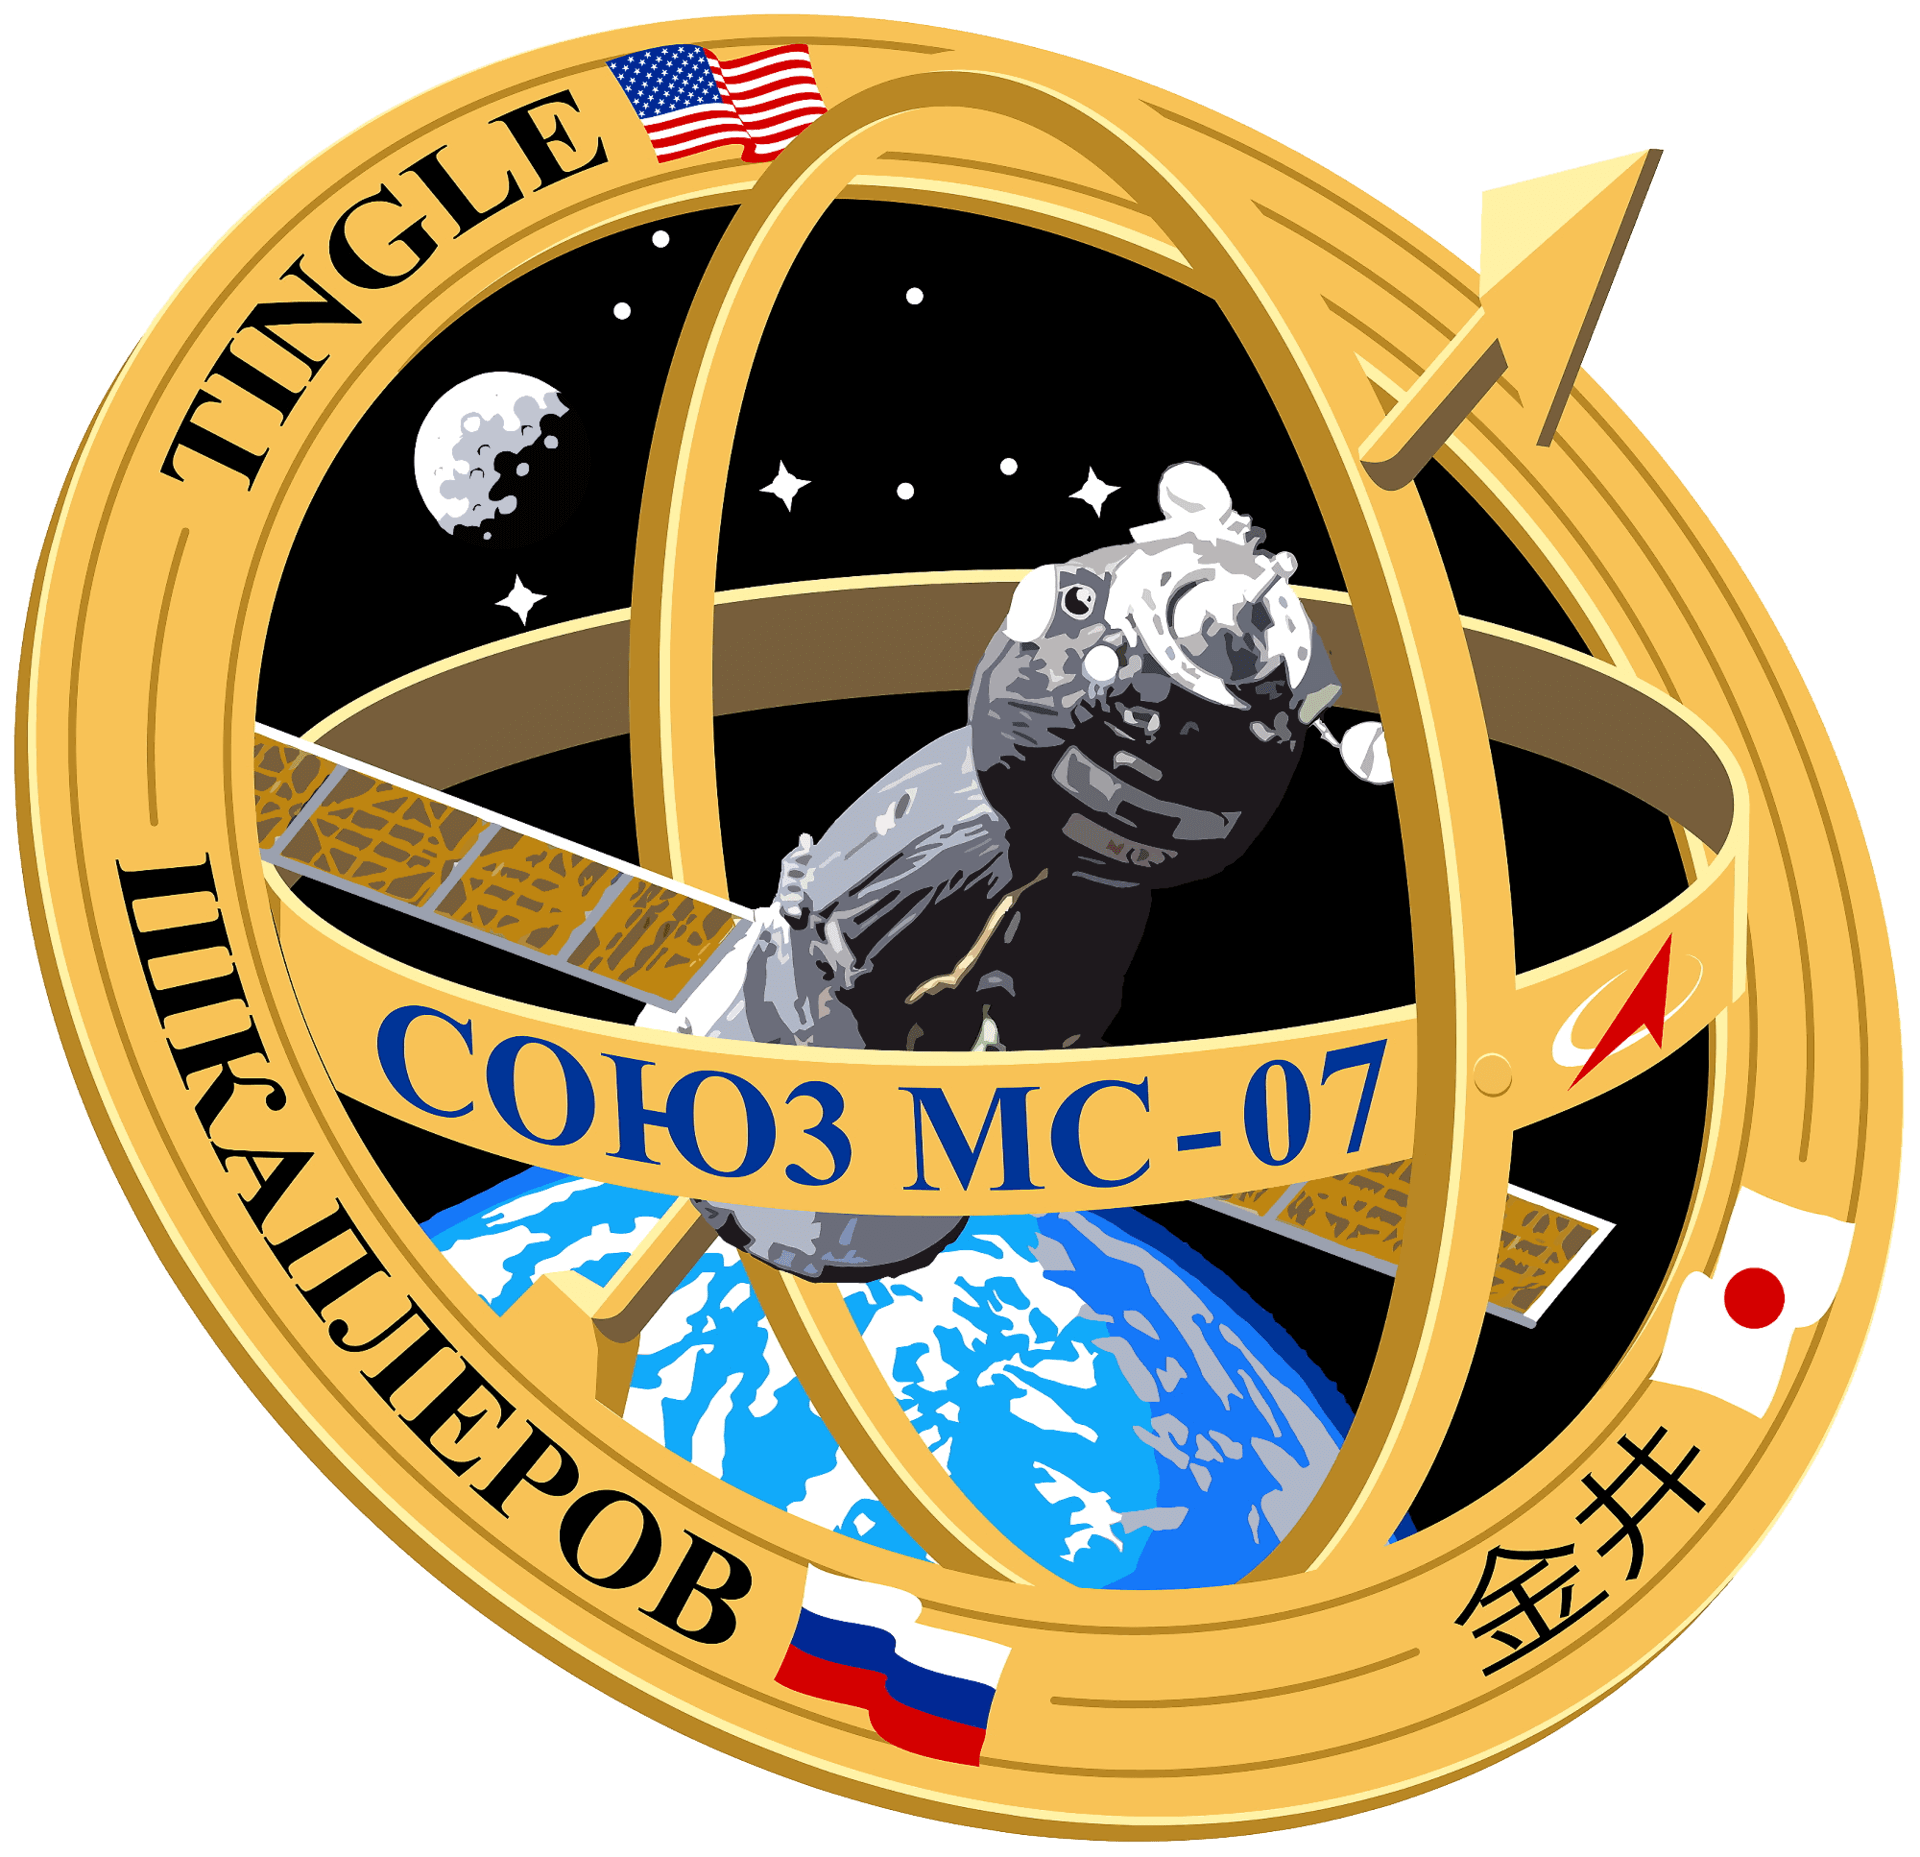 Mission patch for Soyuz MS-07